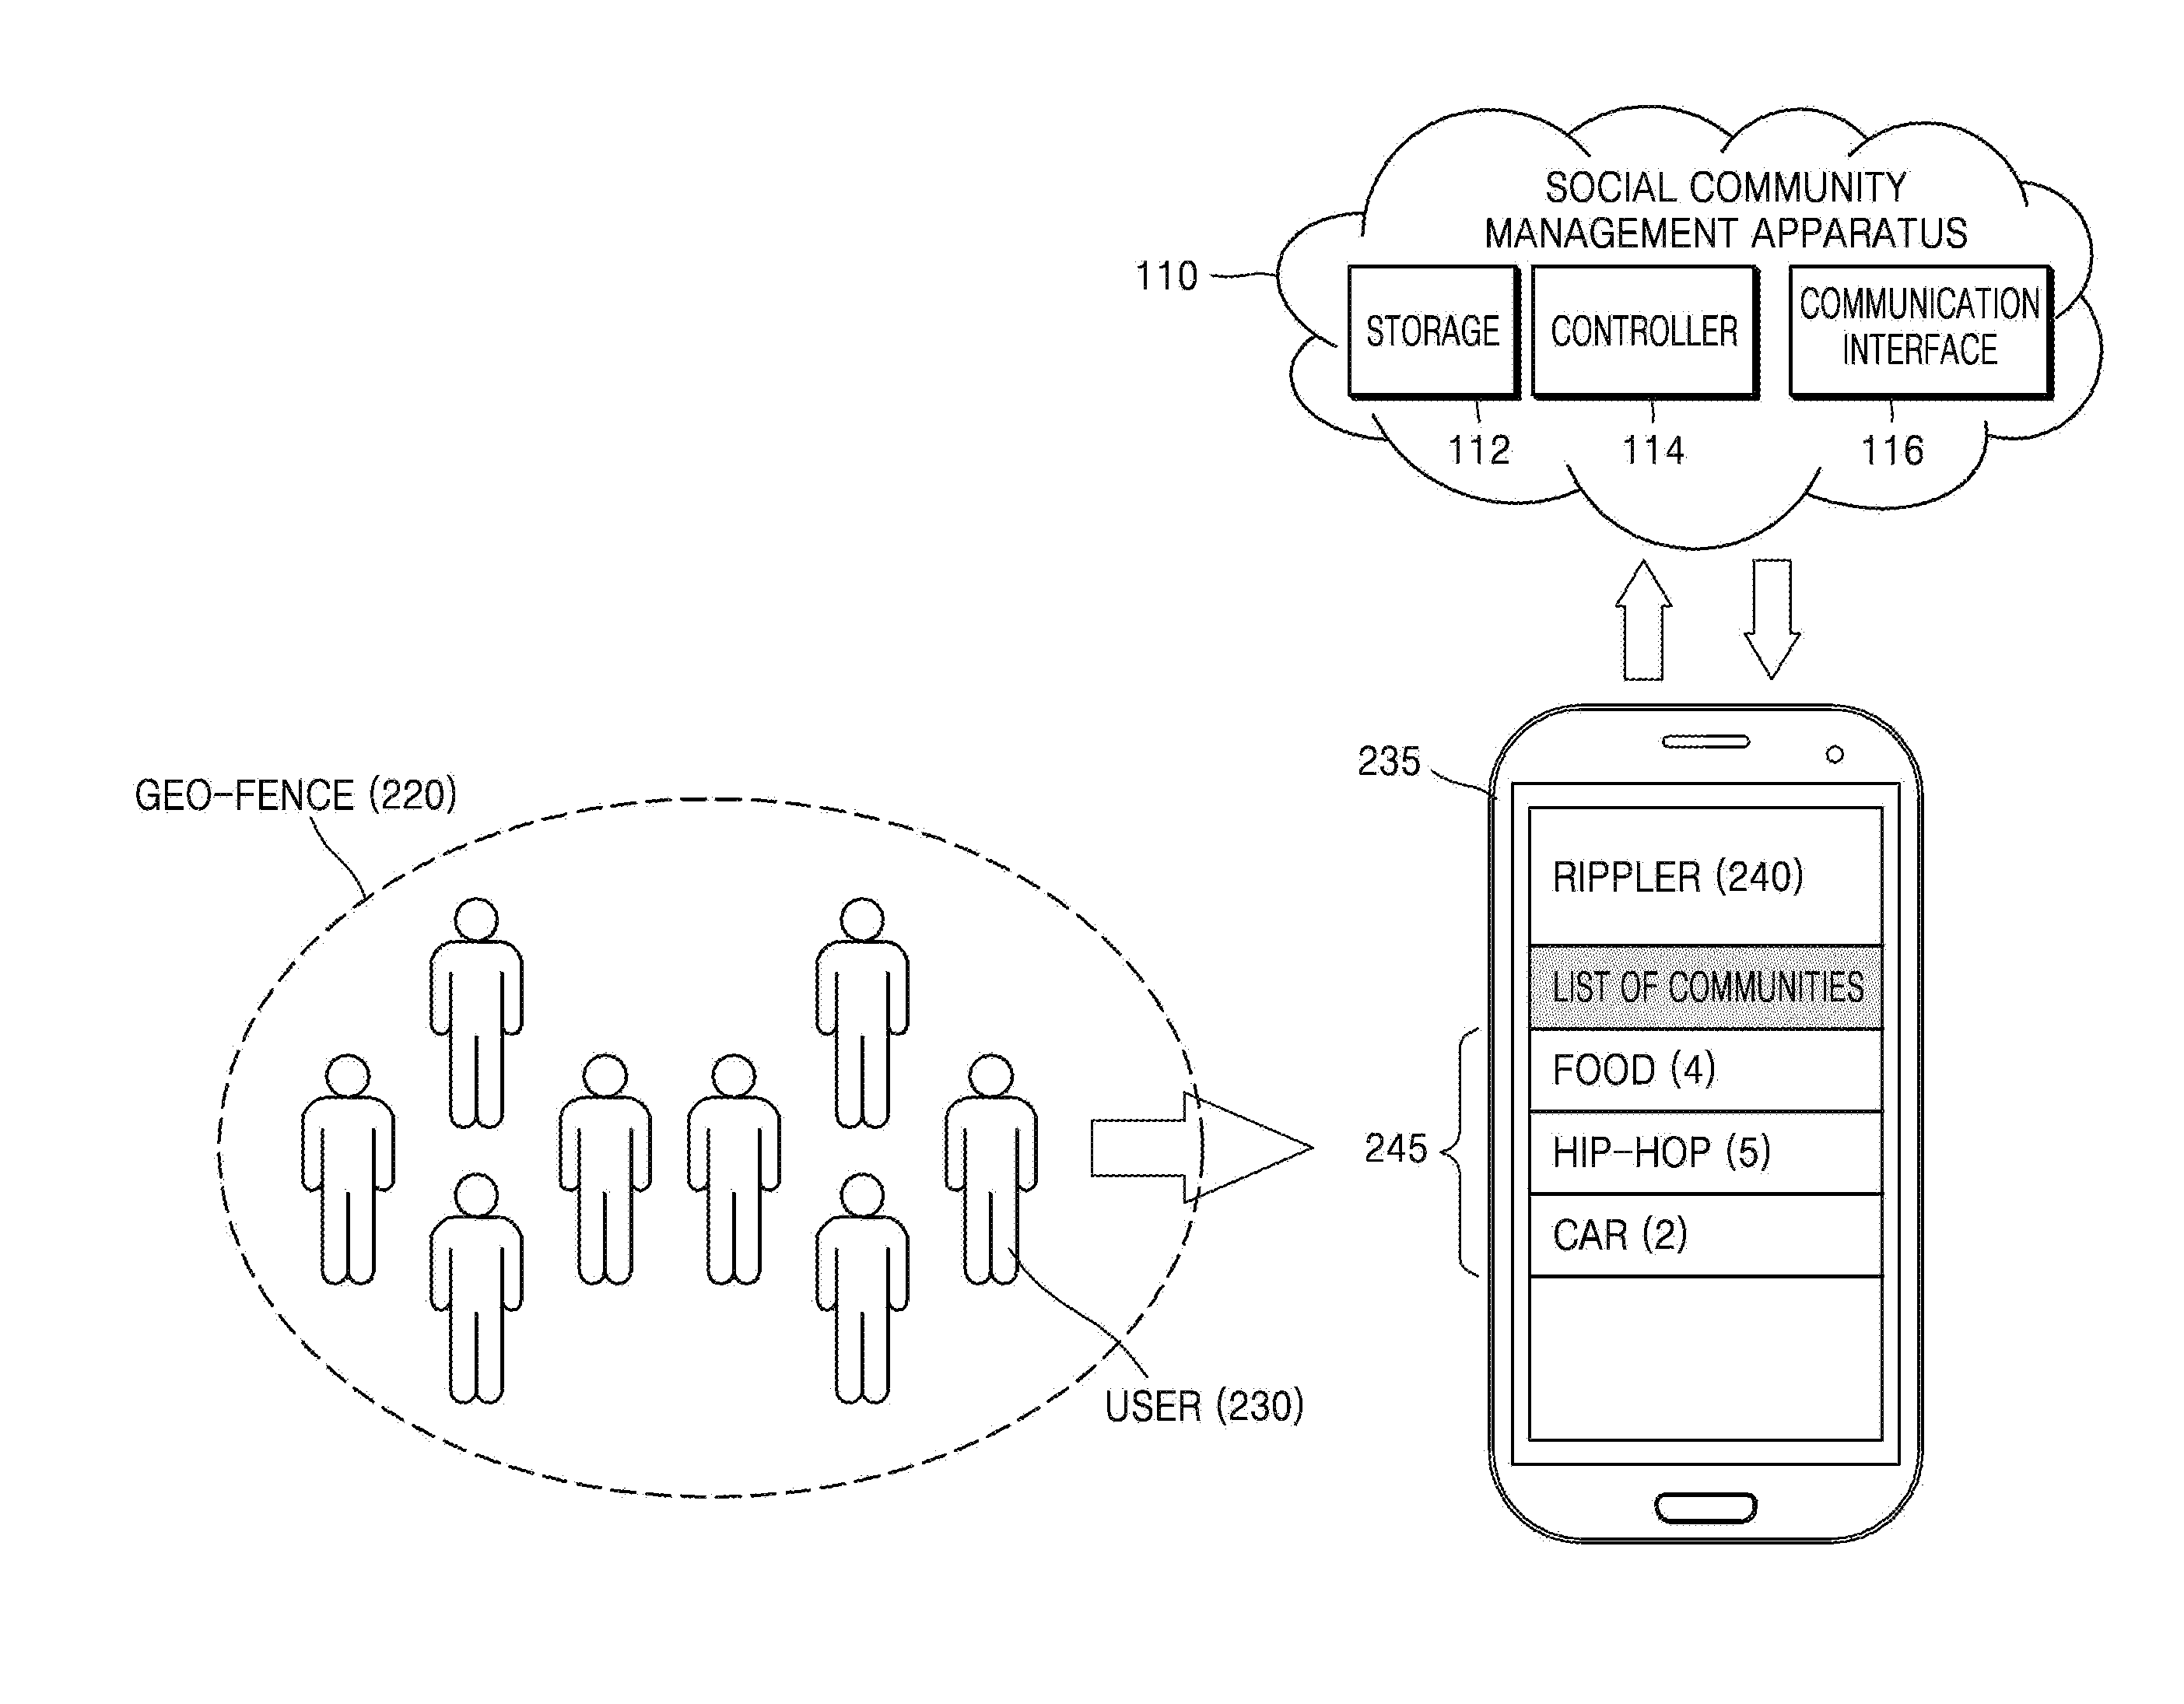 Location-based social community management apparatus and method